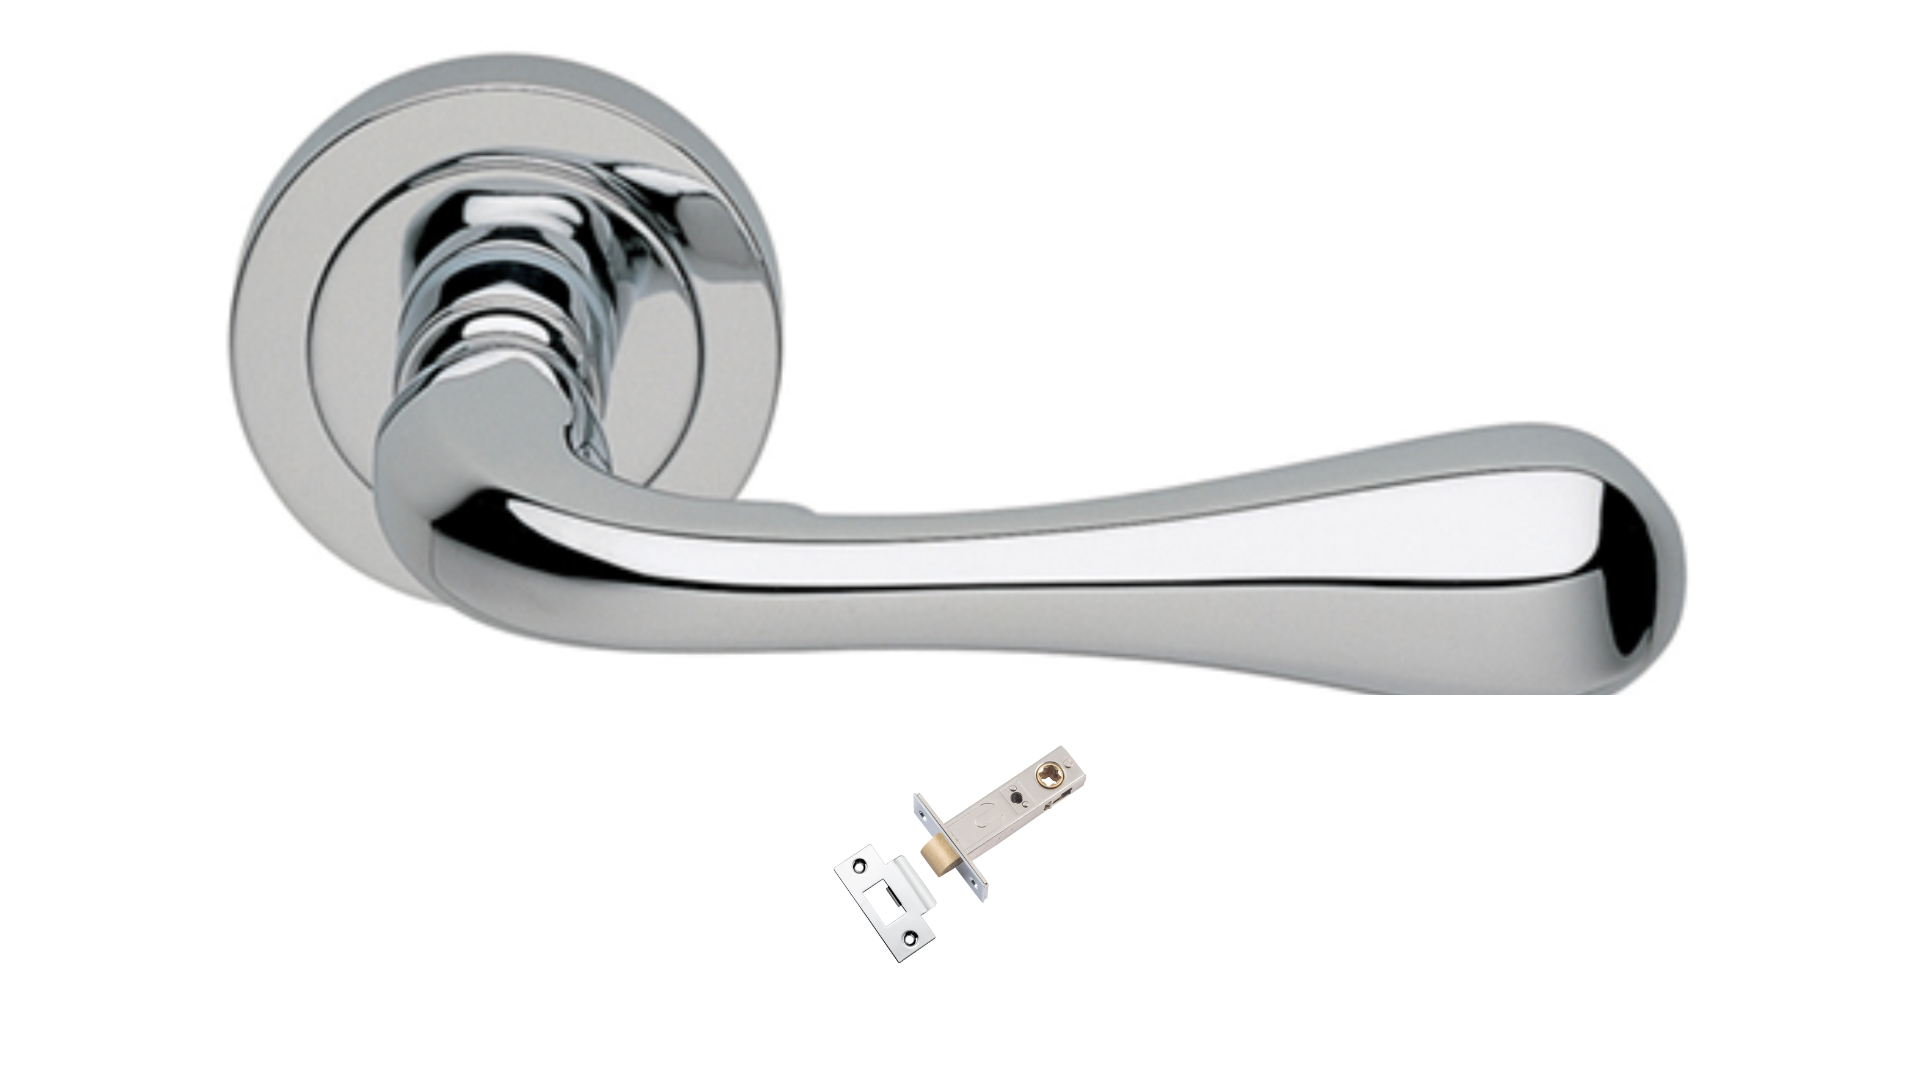 Product picture of the Astro Polished Chrome Door Handle with separate tubular latch on a white background.